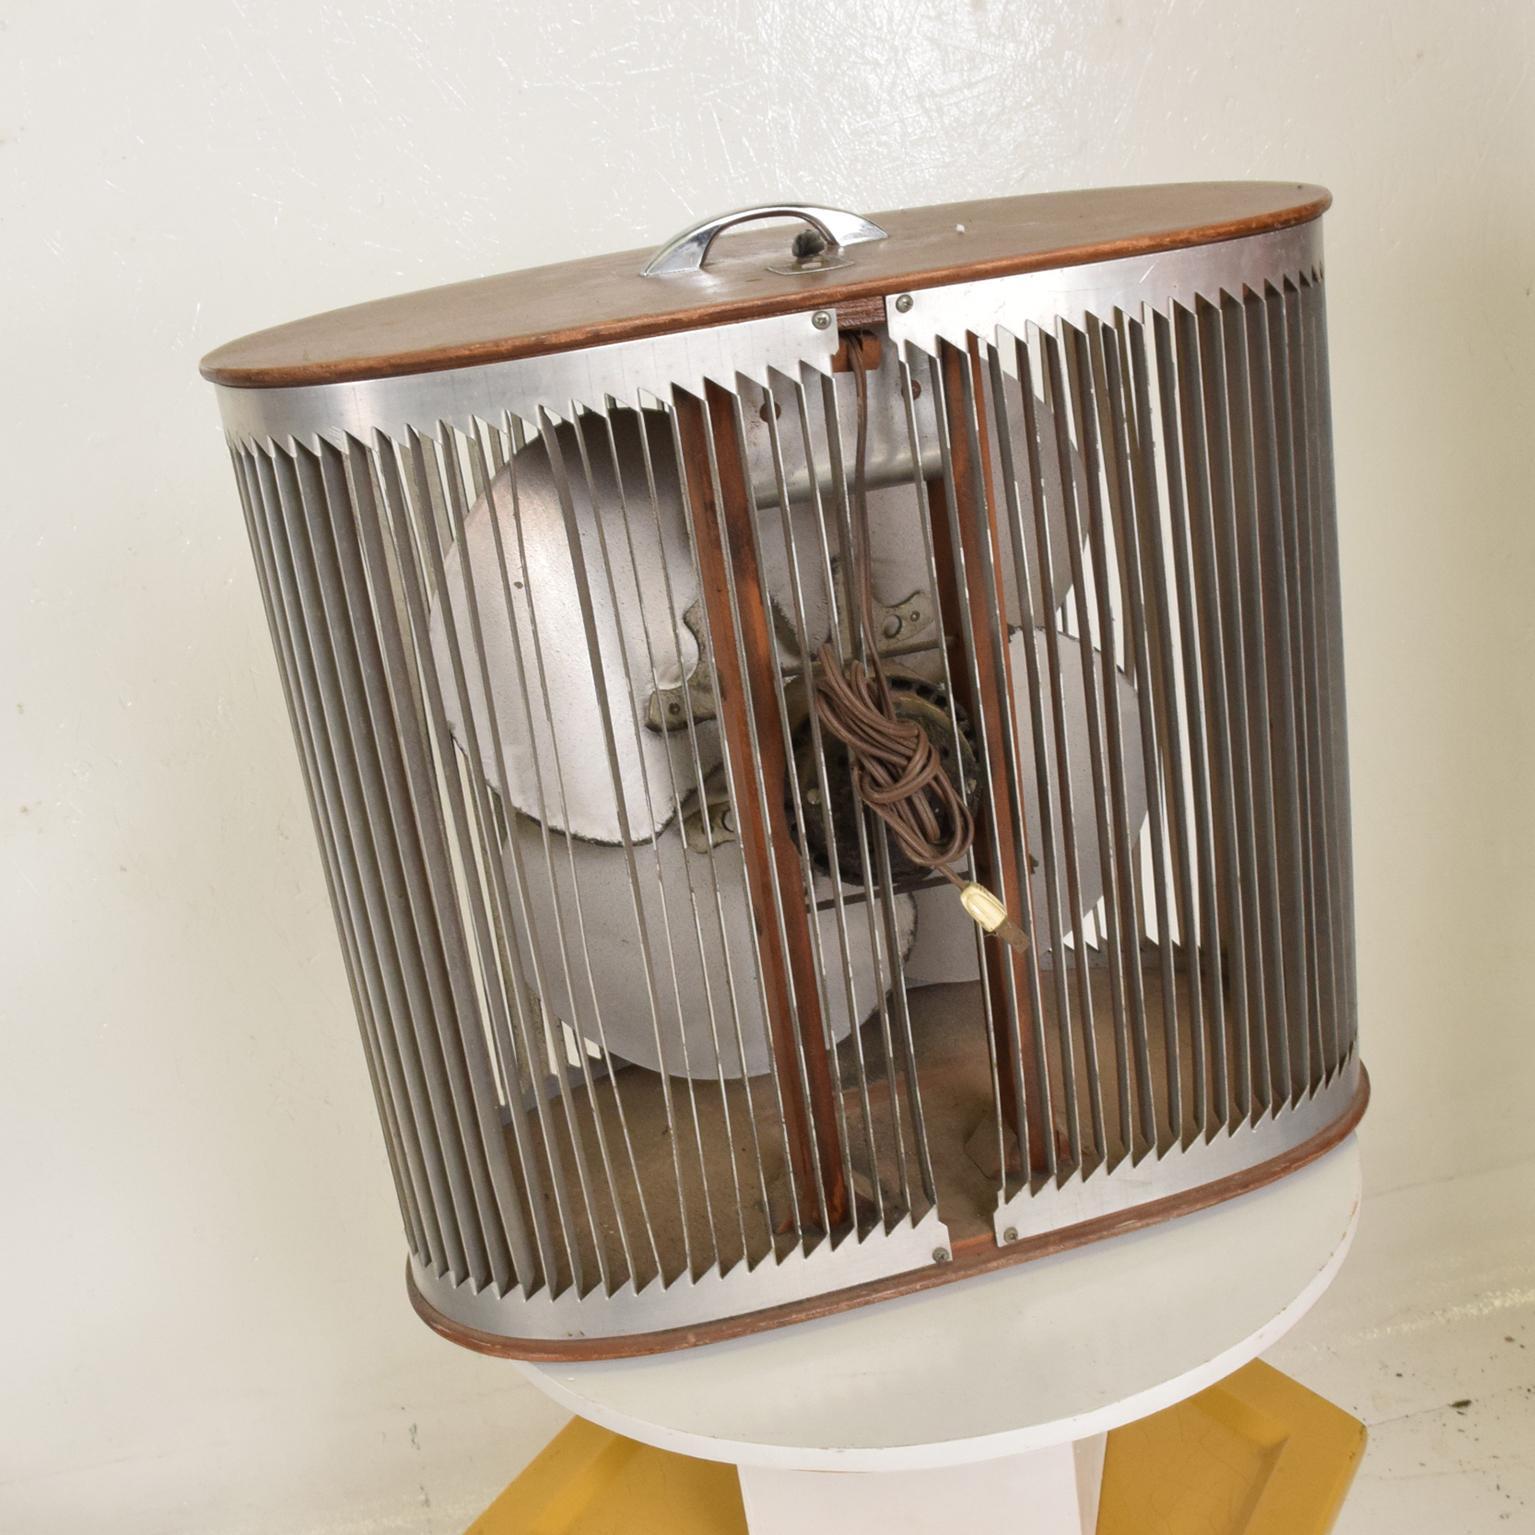 Patinated Mid-Century Modern Electric Fan Mathes Cooler Vintage Decorative